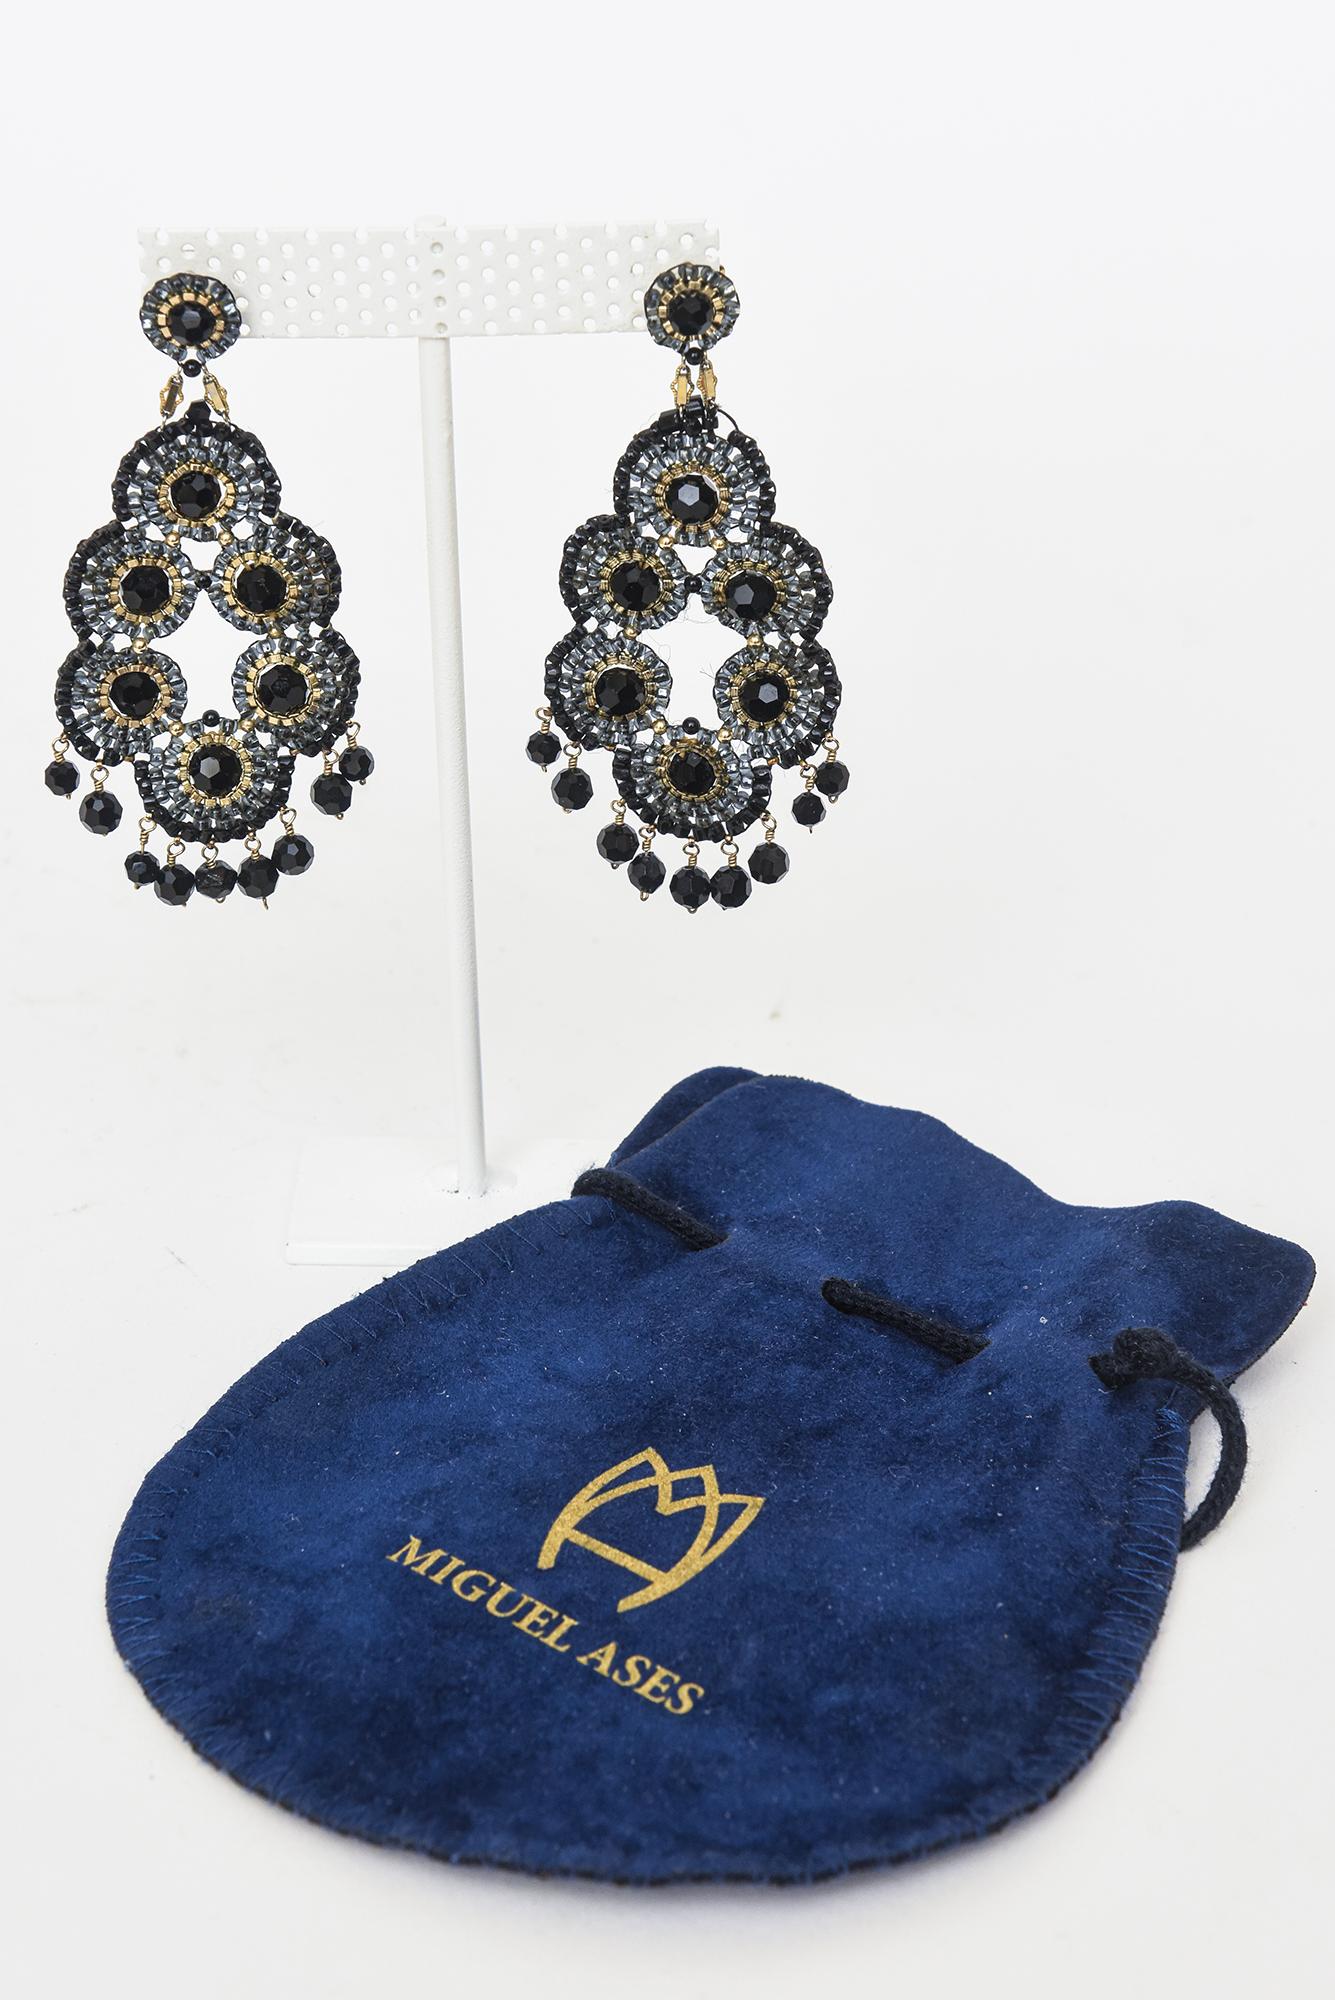 Miguel Ases Black Onyx and Gold Metal Beaded Chandelier Pierced Earrings For Sale 4